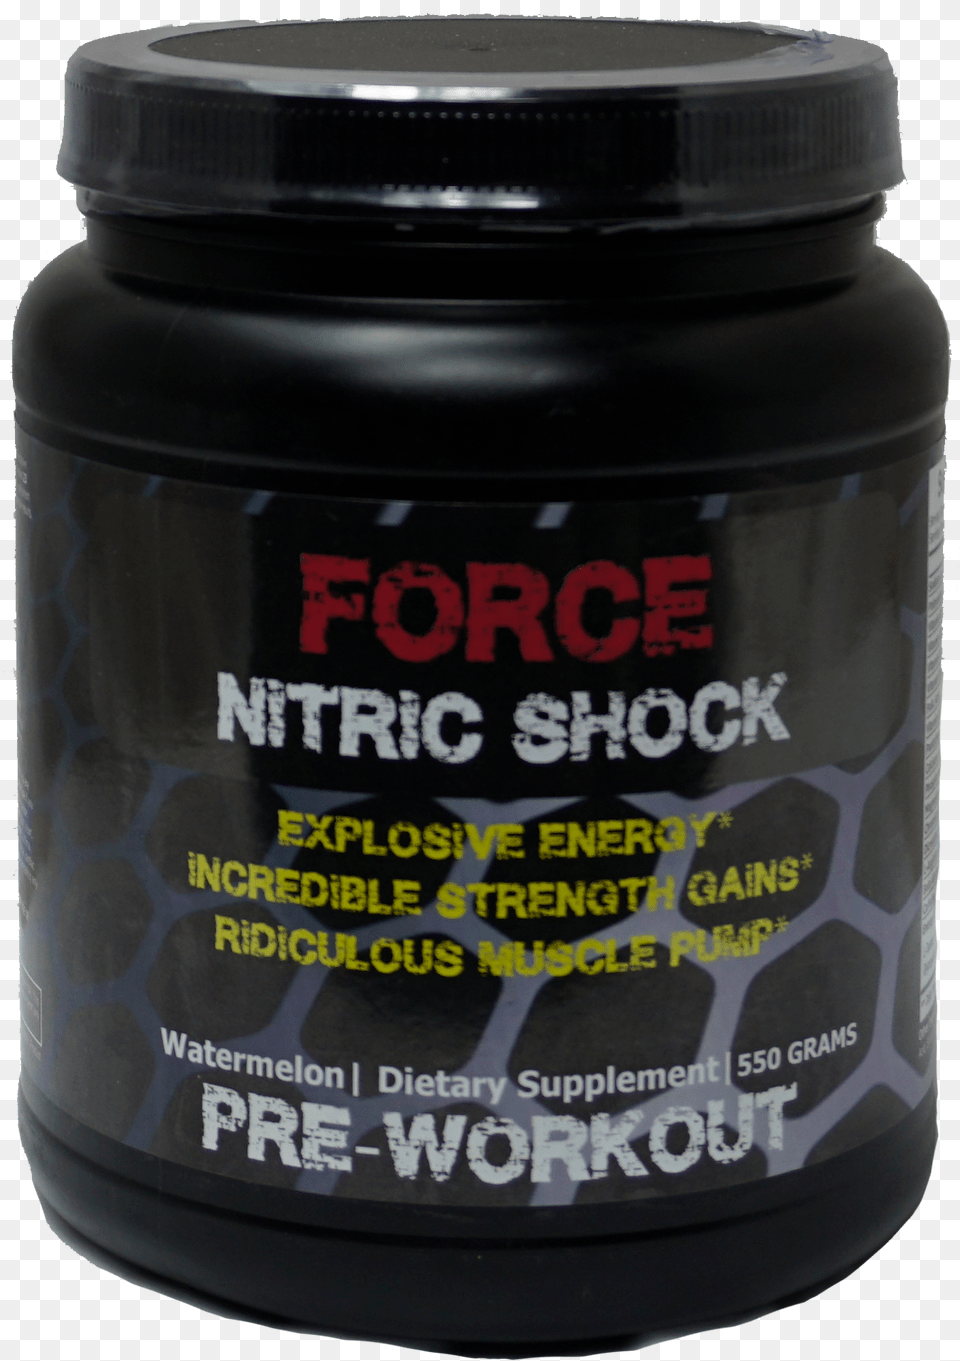 Force Bodybuilding Supplement, Bottle, Can, Tin Png Image